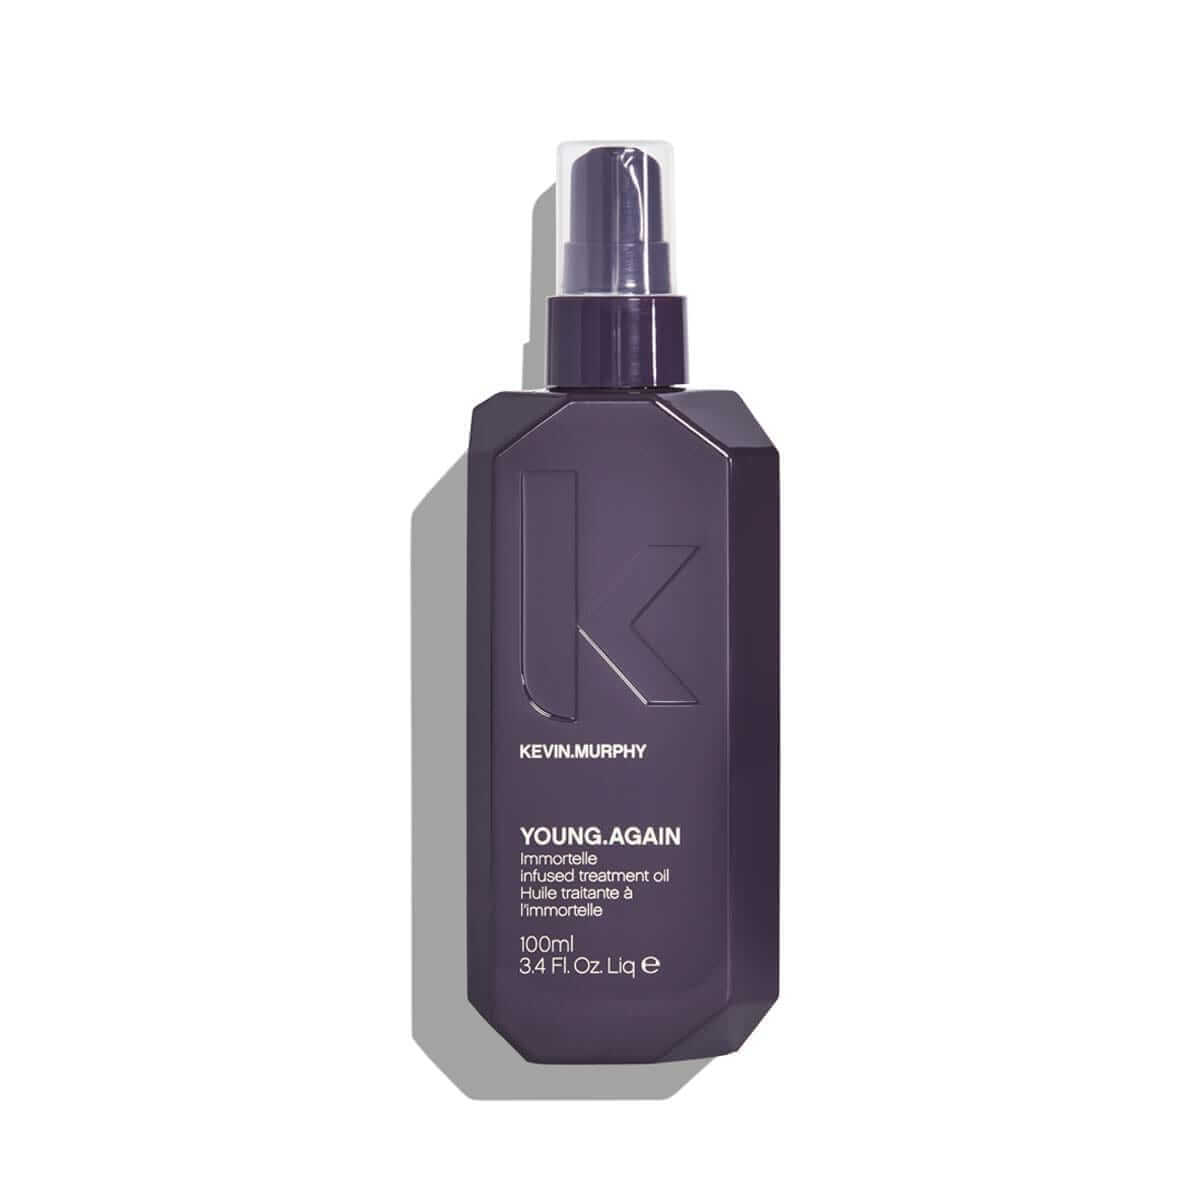 Kevin.Murphy Young.Again 100mL